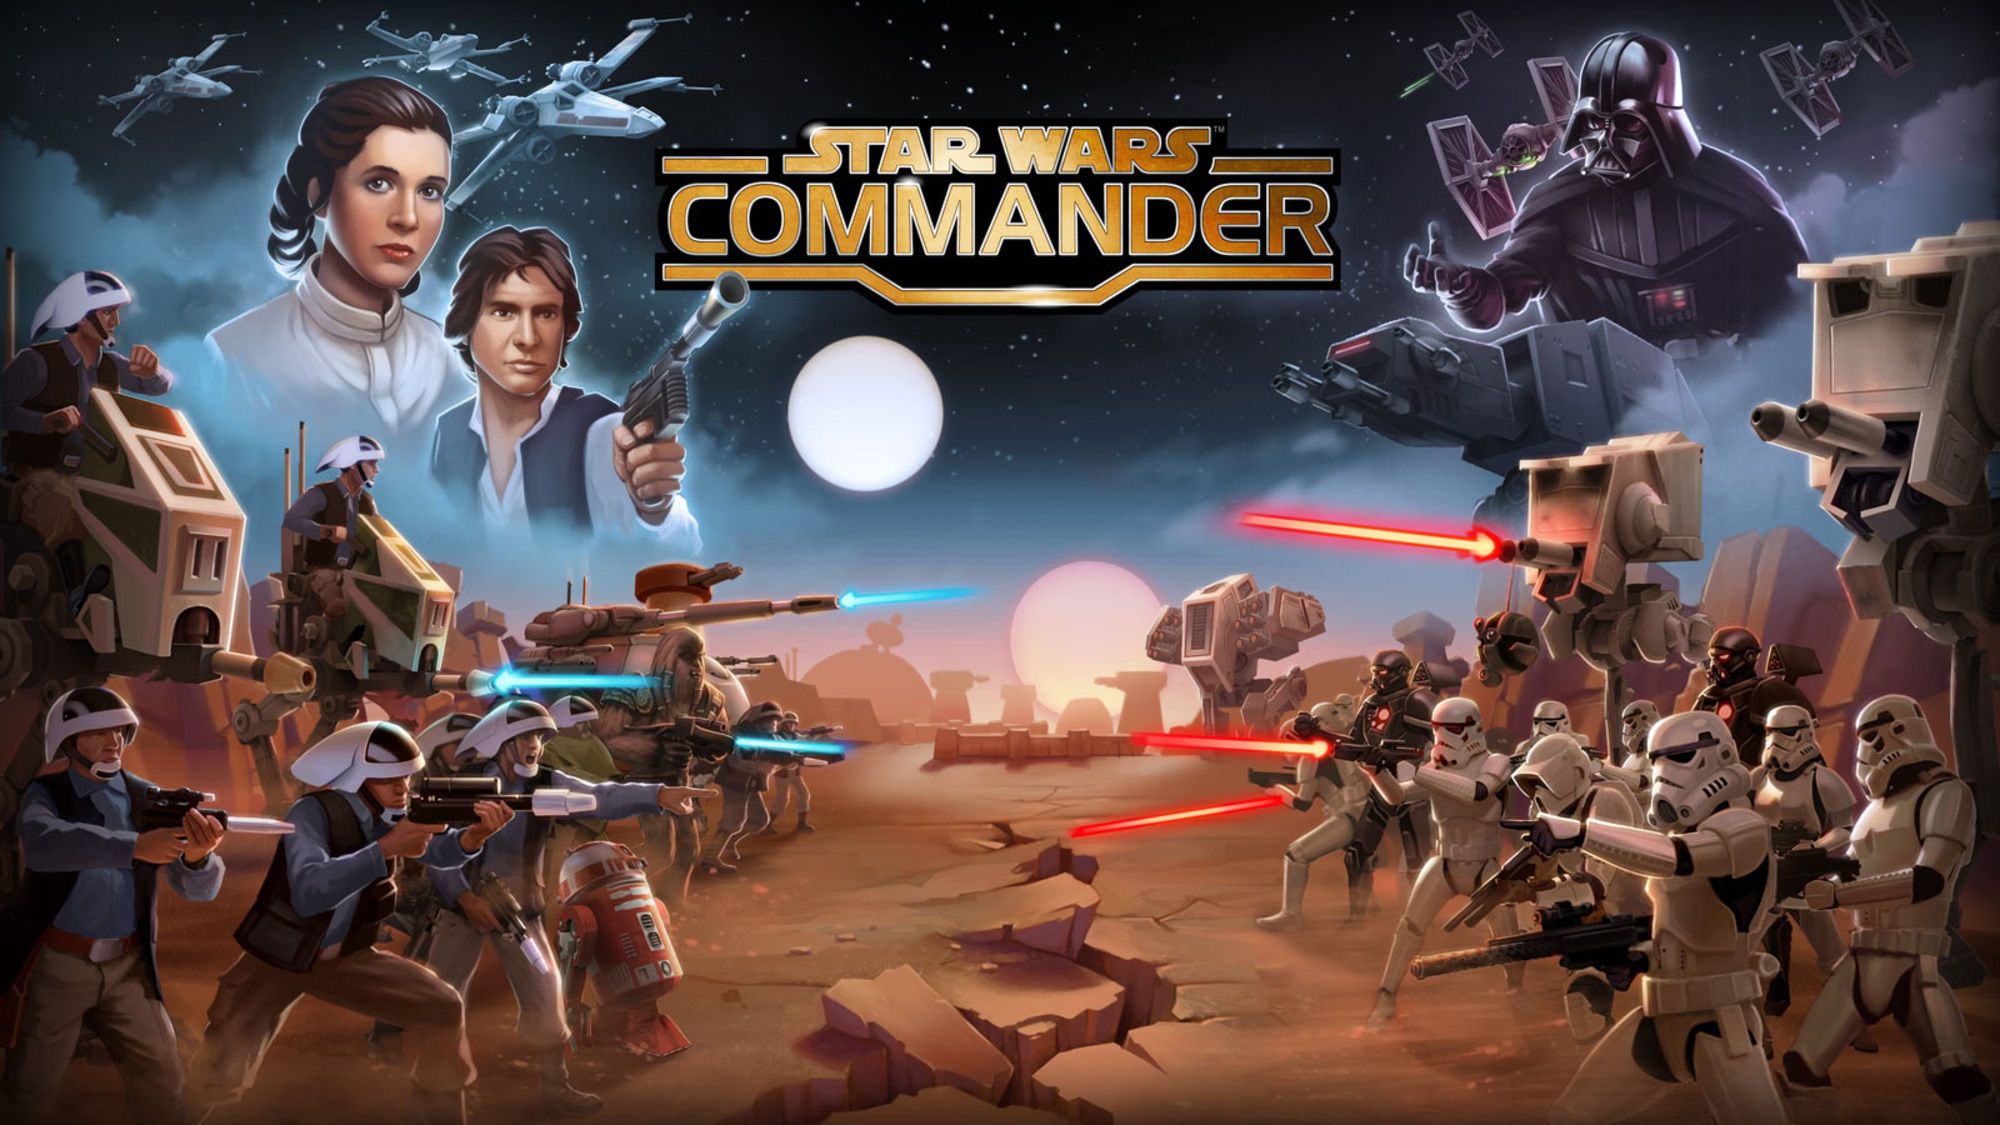 Zynga is working on two Star Wars games for mobile